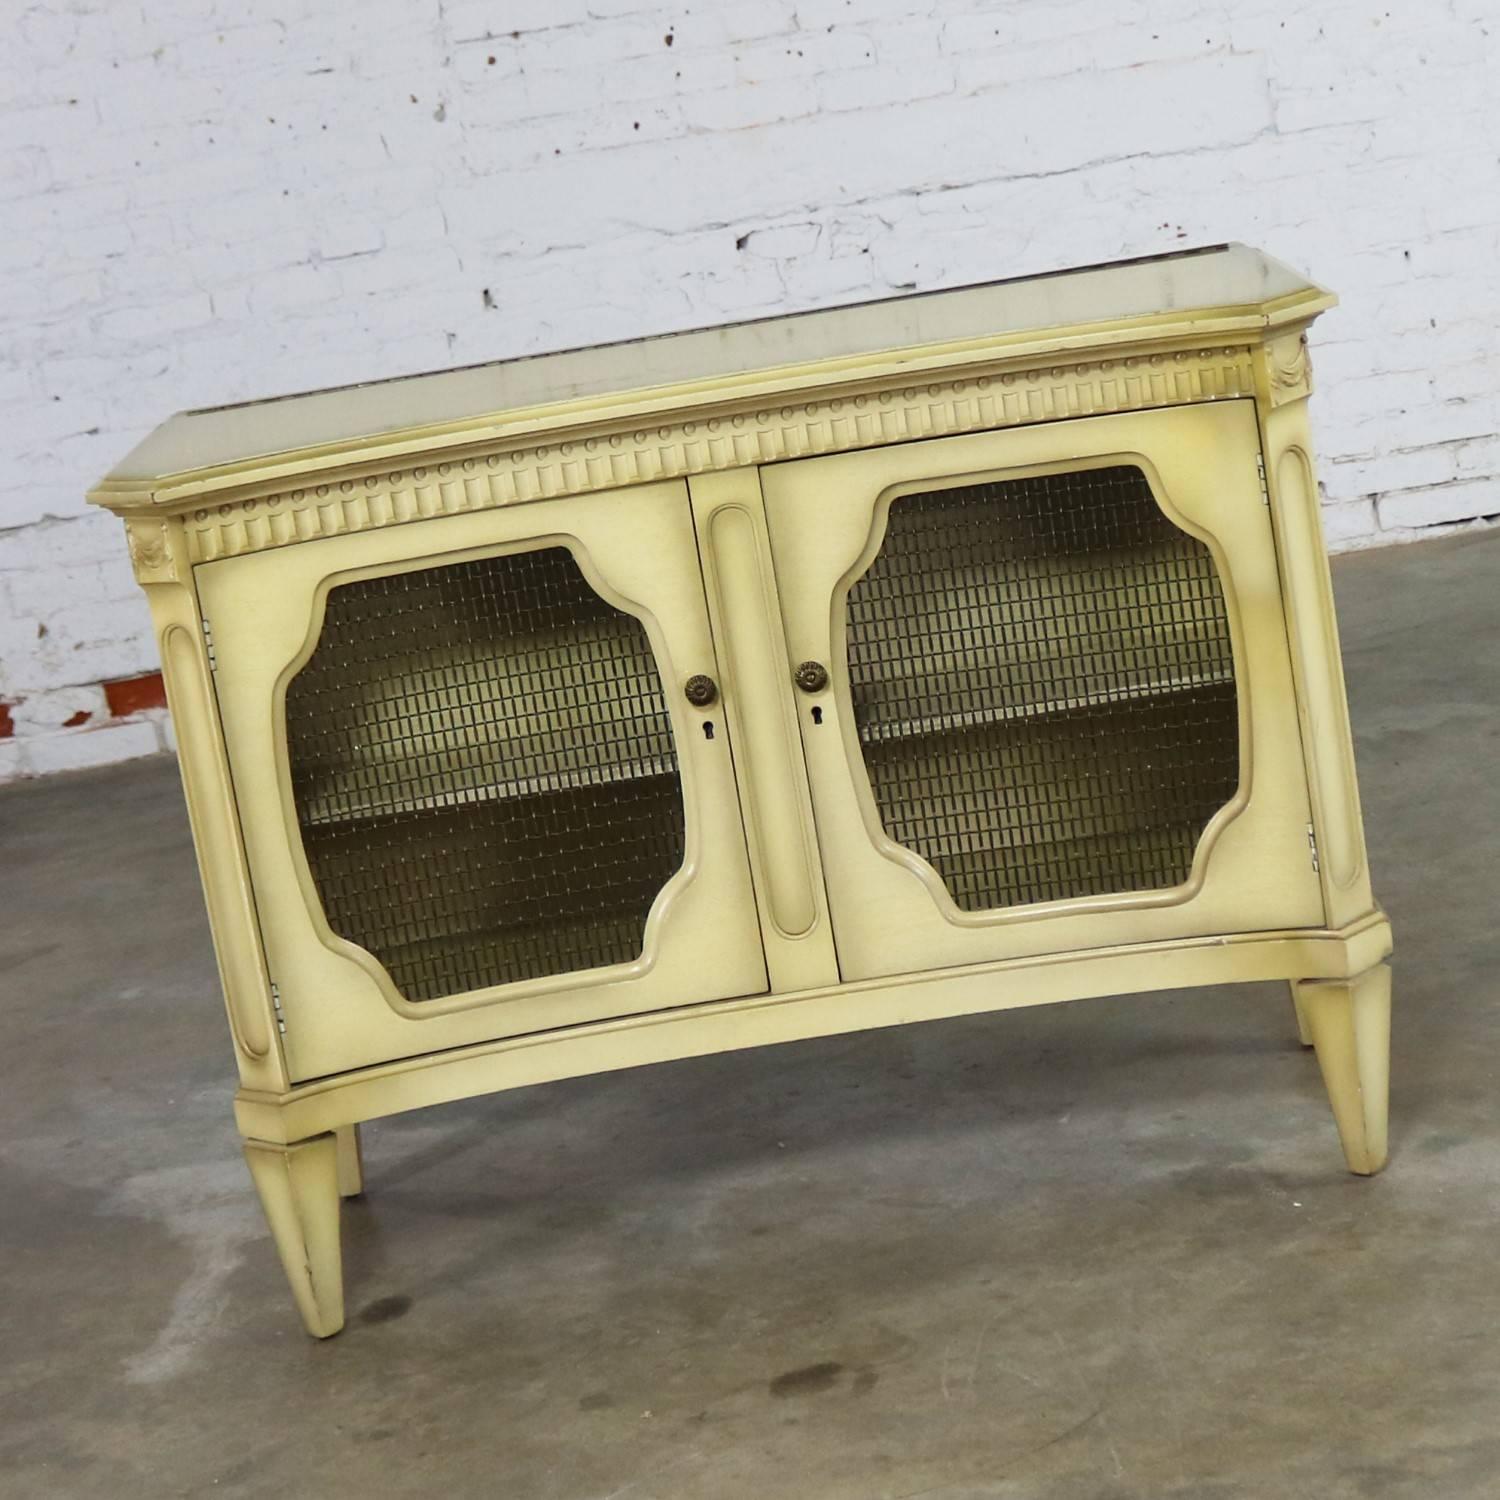 Elegant Hollywood Regency dry bar and liquor cabinet. This midcentury cabinet is done in a wonderful ivory painted finish called, according to the stamp on the back, Golden Glo. It is in beautiful vintage original condition and any appropriate